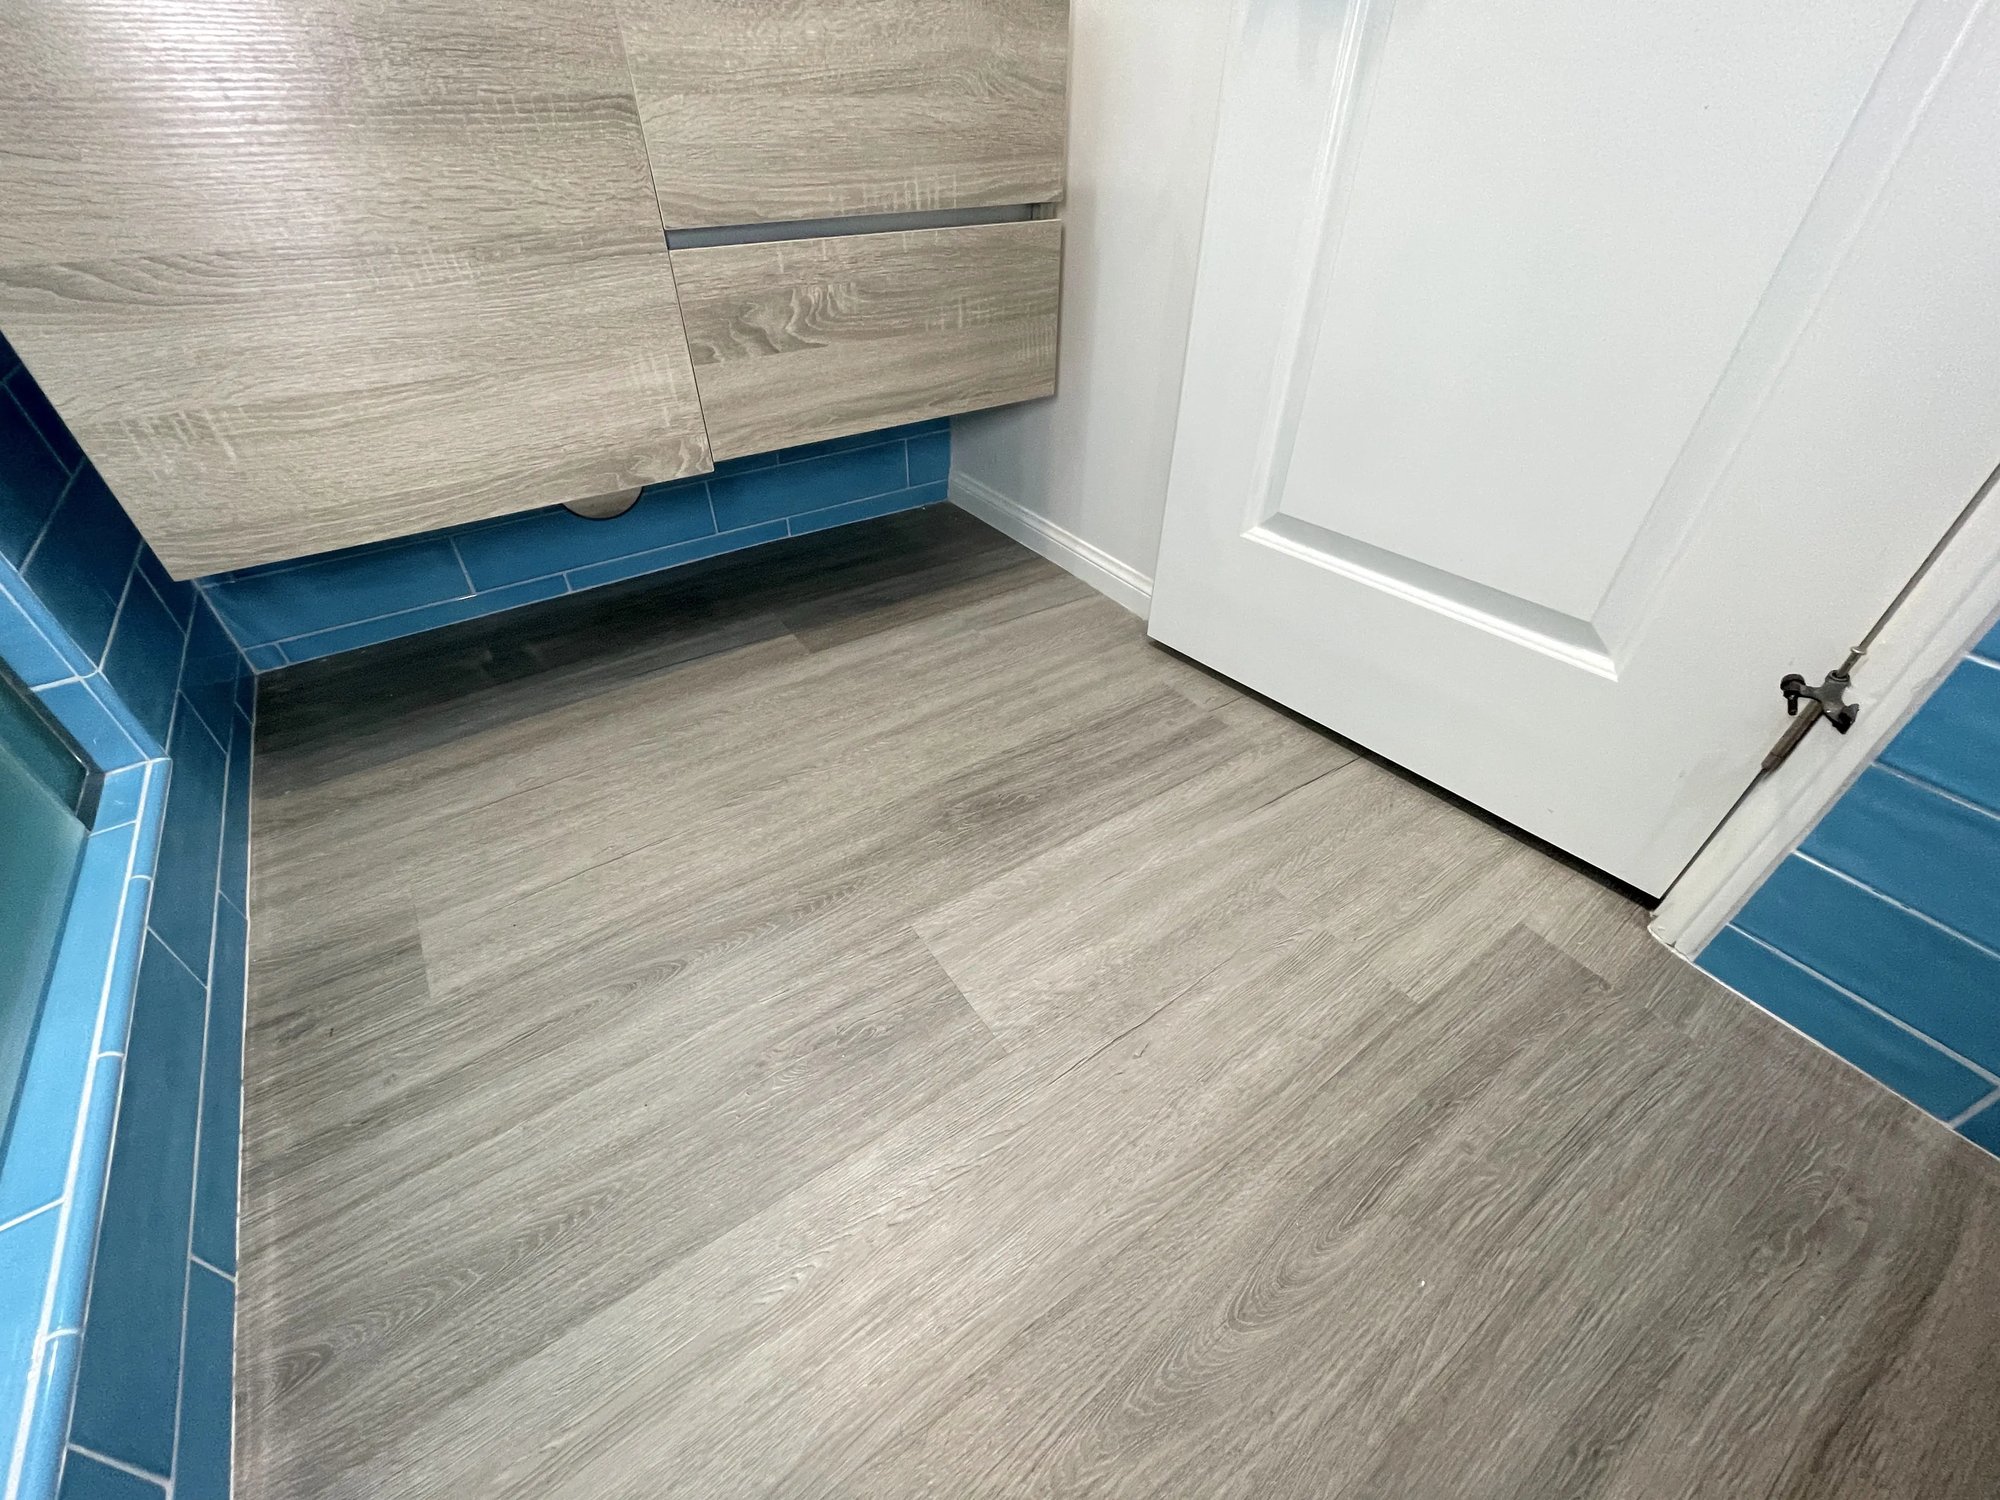 Porcelain floor tile that looks like wood was used for the master bathroom remodel to match the color tone and texture of the vanity.